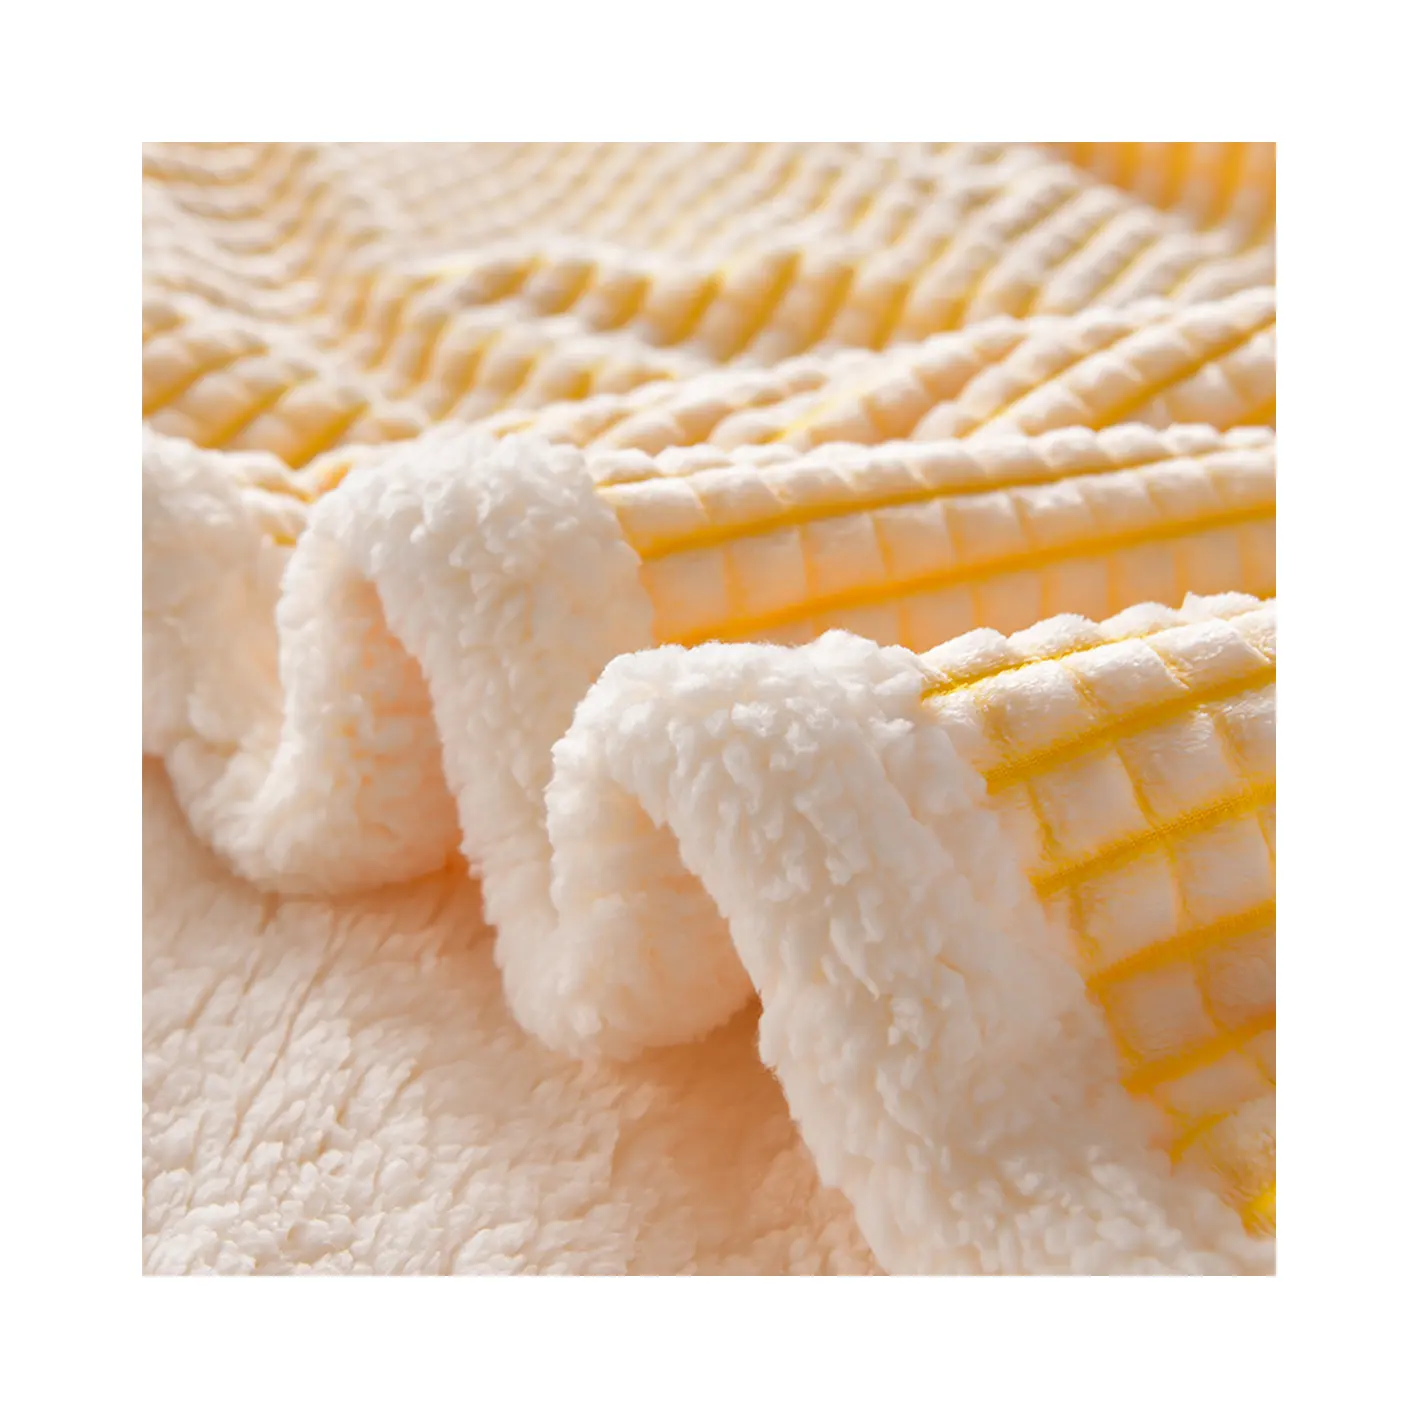 100% Polyester Extra Soft Cozy Fuzzy Plush Fleece Throw Snuggle Keep Warm Machine Washable Sherpa Blanket Queen For Bed Couch